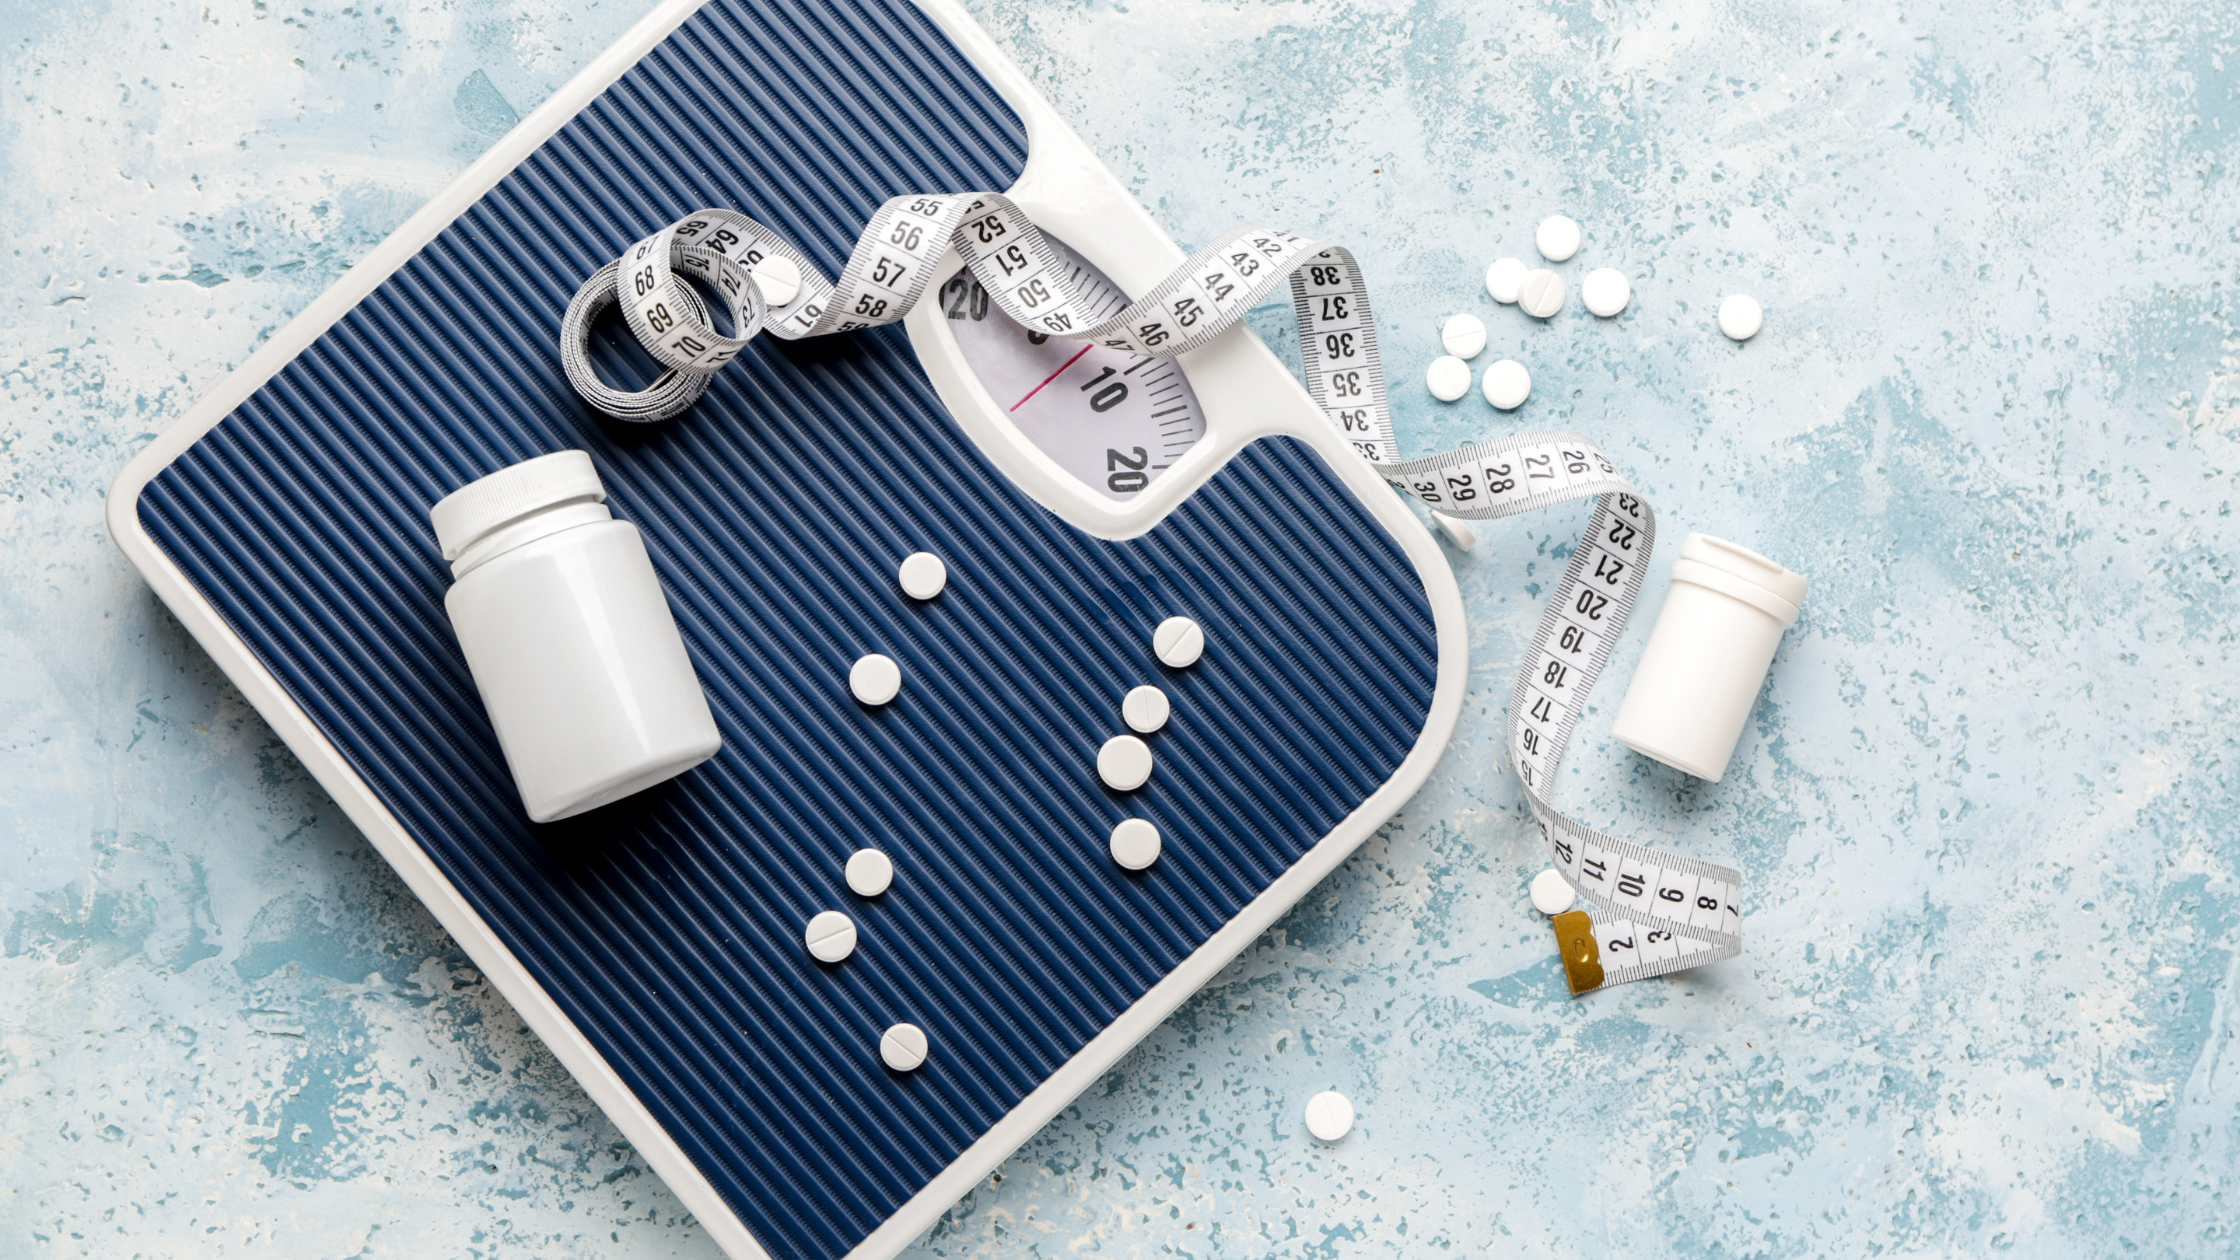 weight loss medication on a scale with a measuring tape